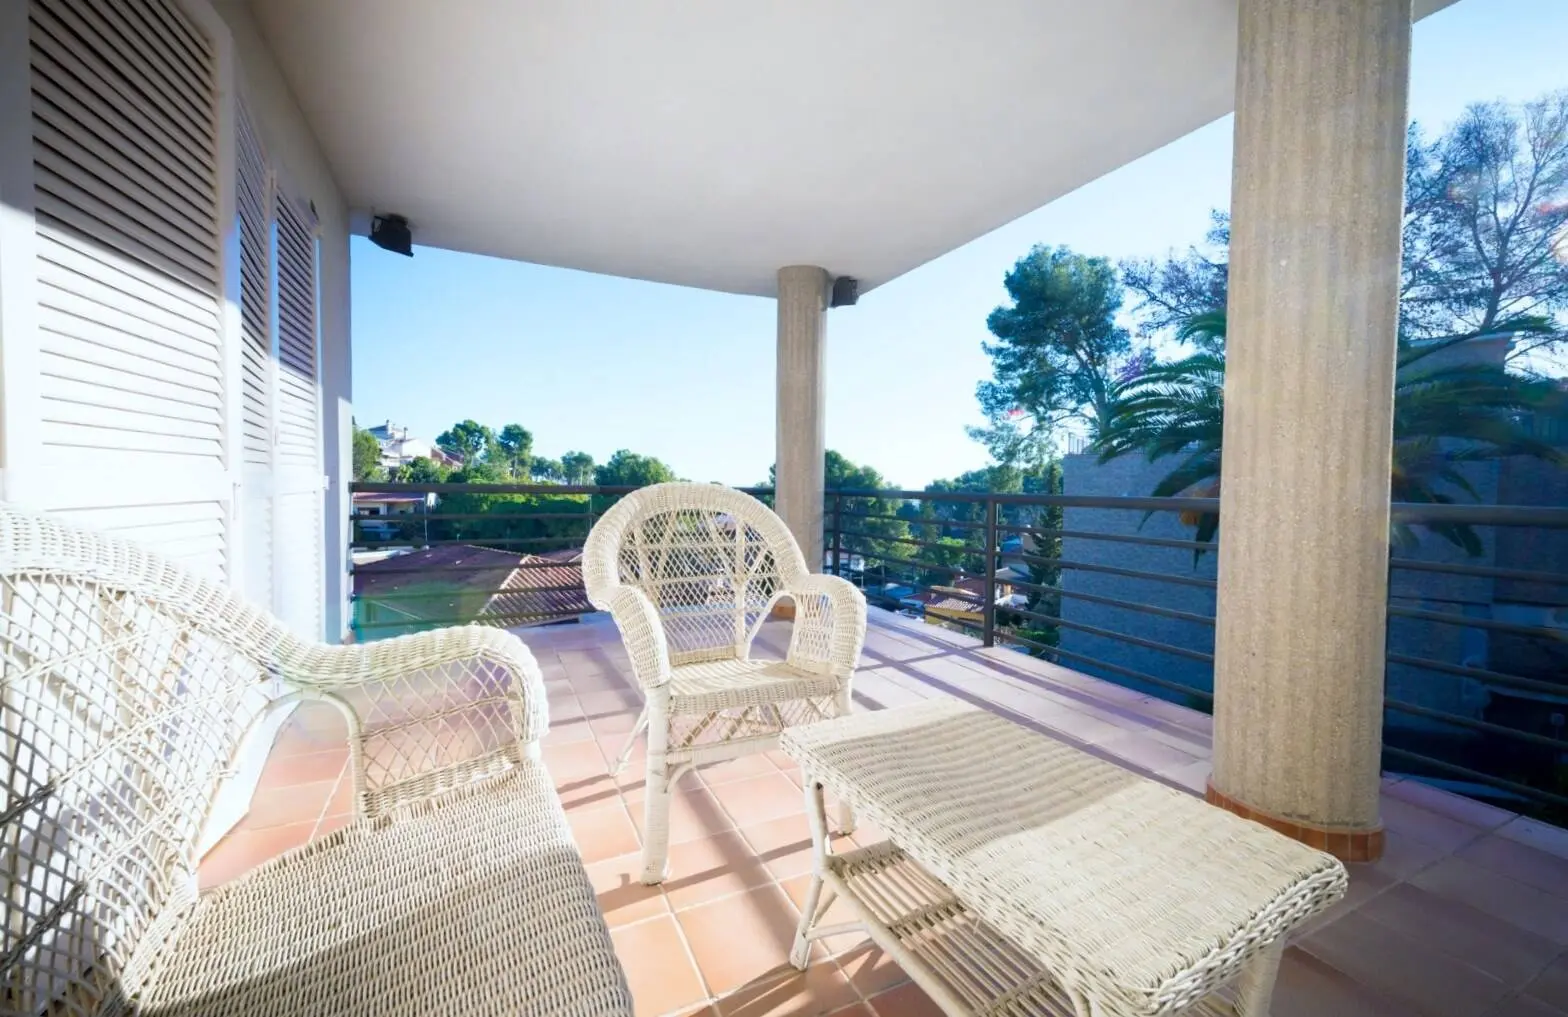 House for sale with a swimming pool in Castelldefels, Barcelona. 23